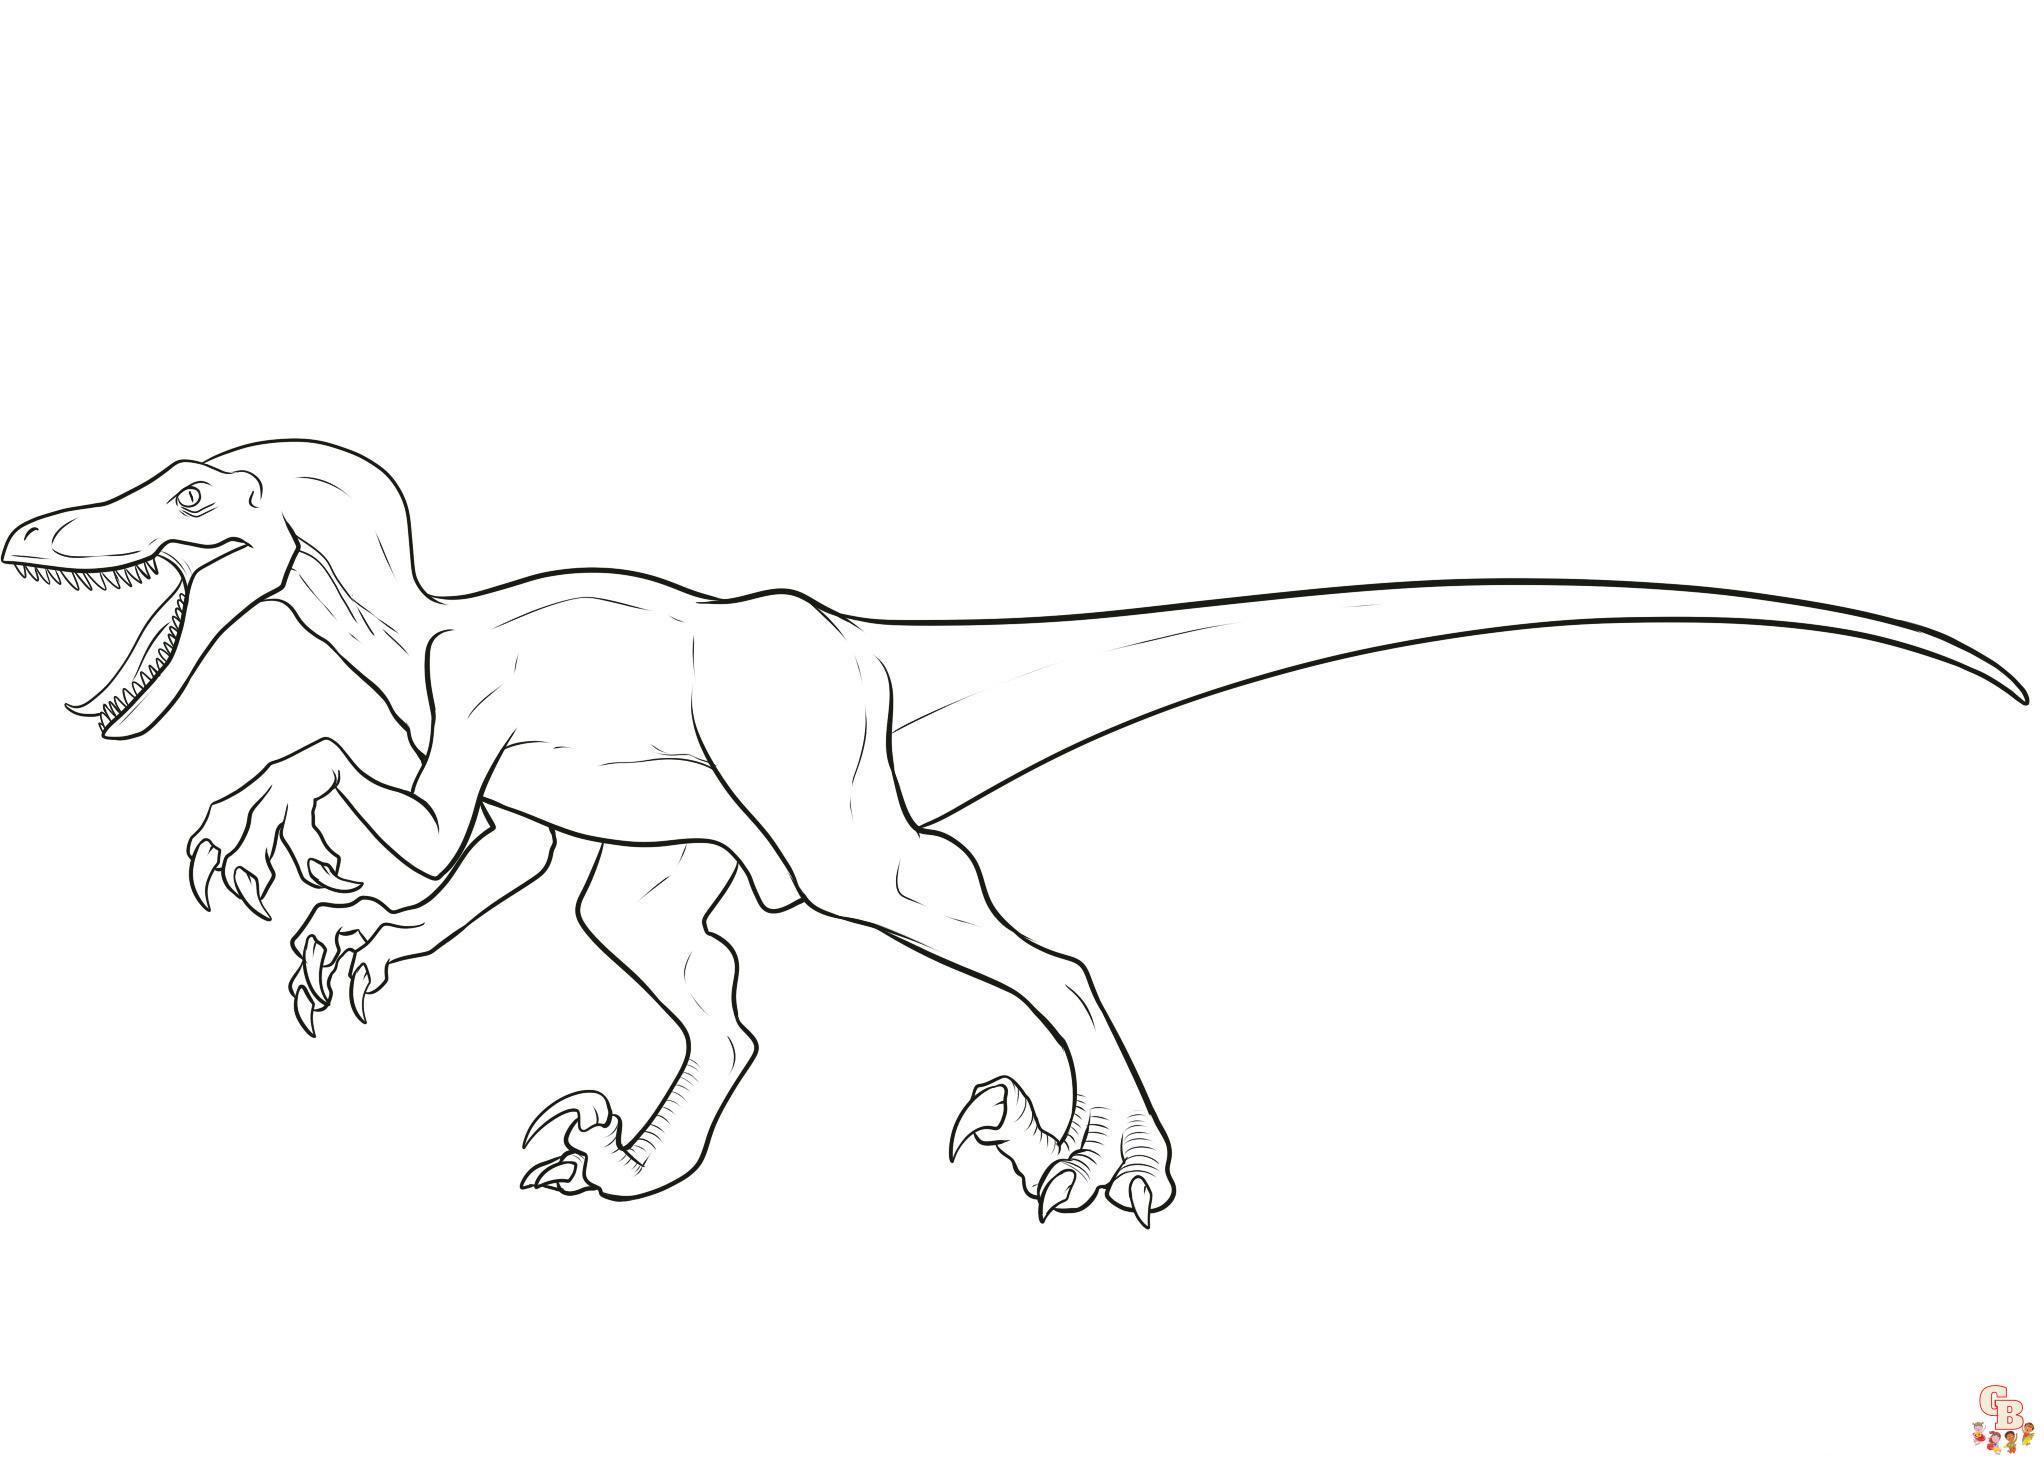 Jurassic Park coloring pages 8